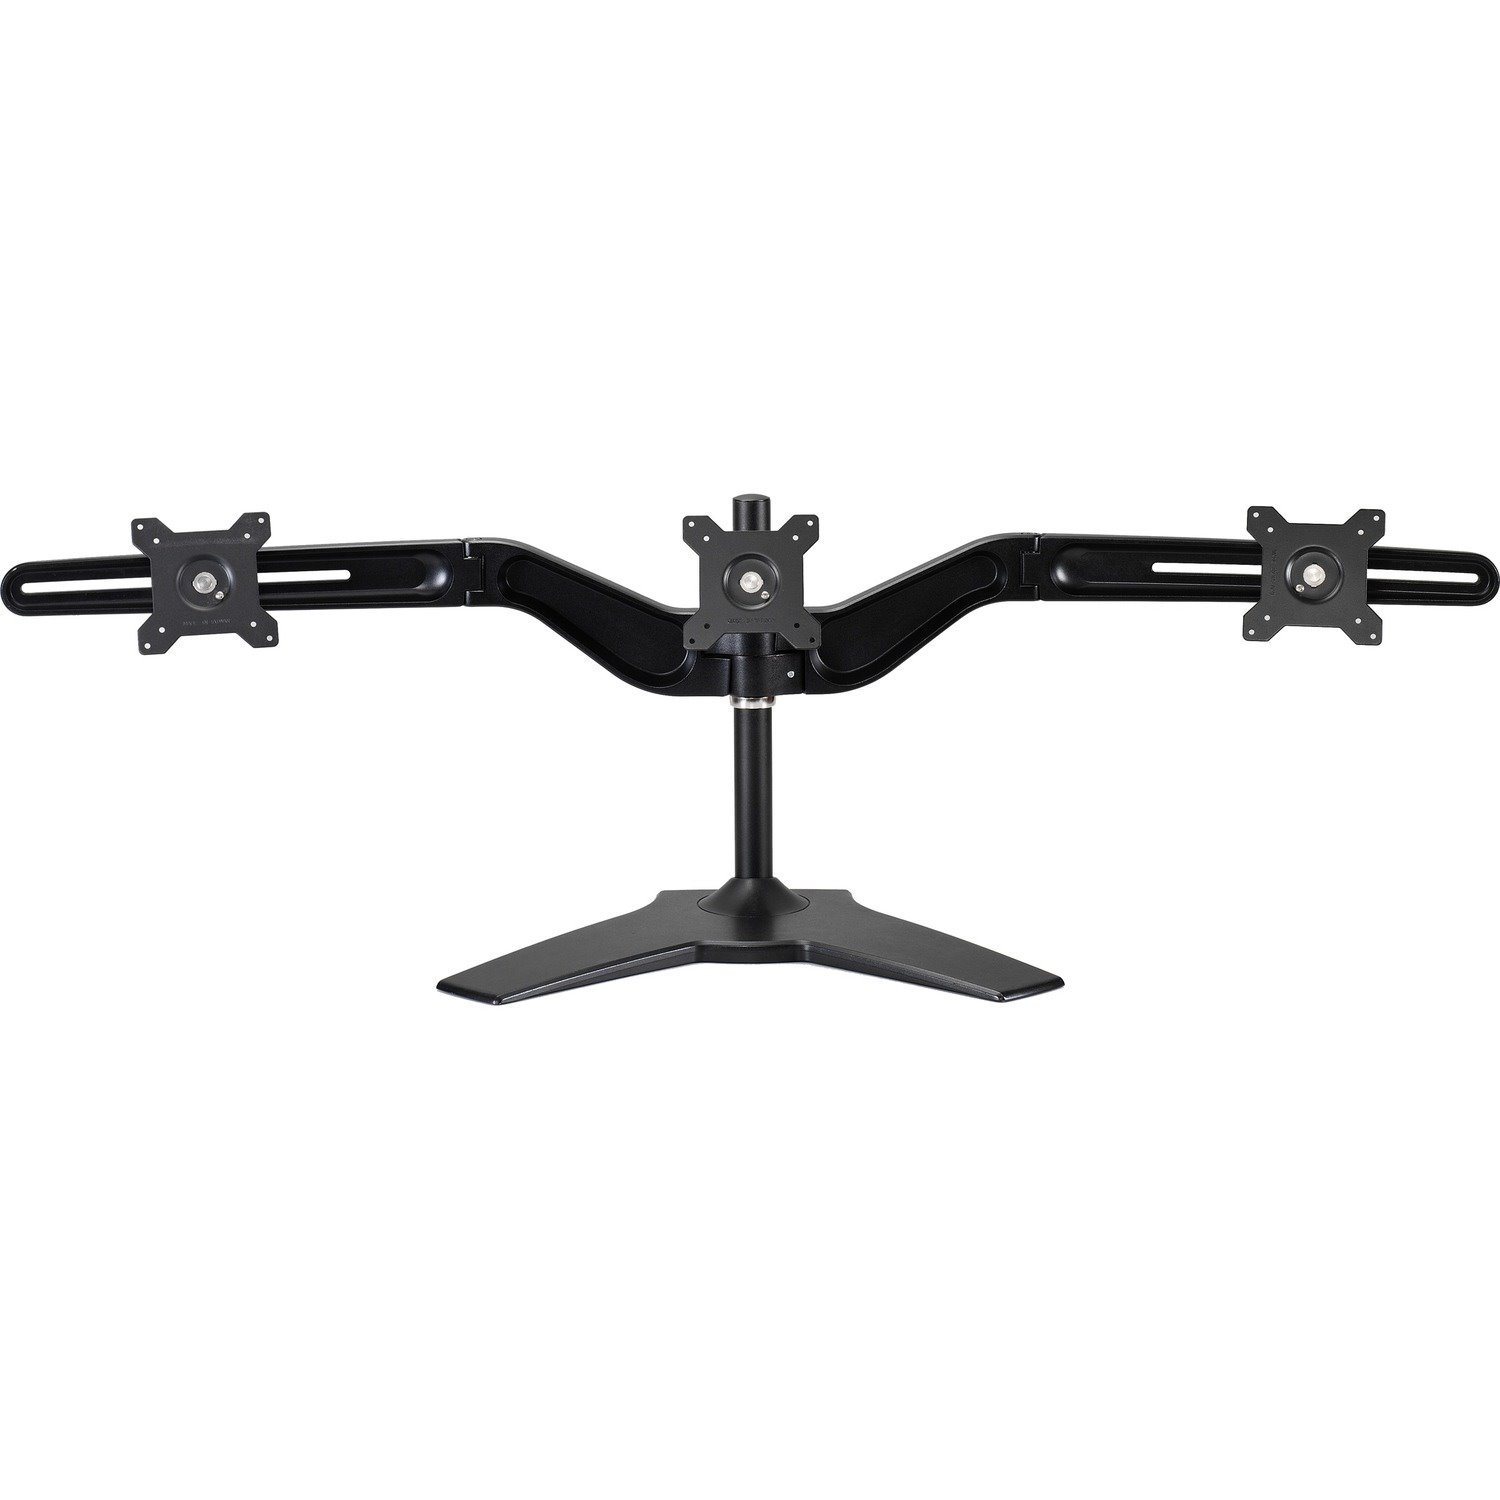 Amer Mounts Stand Based Triple Monitor Mount for three 15"-24" LCD/LED Flat Panel Screens